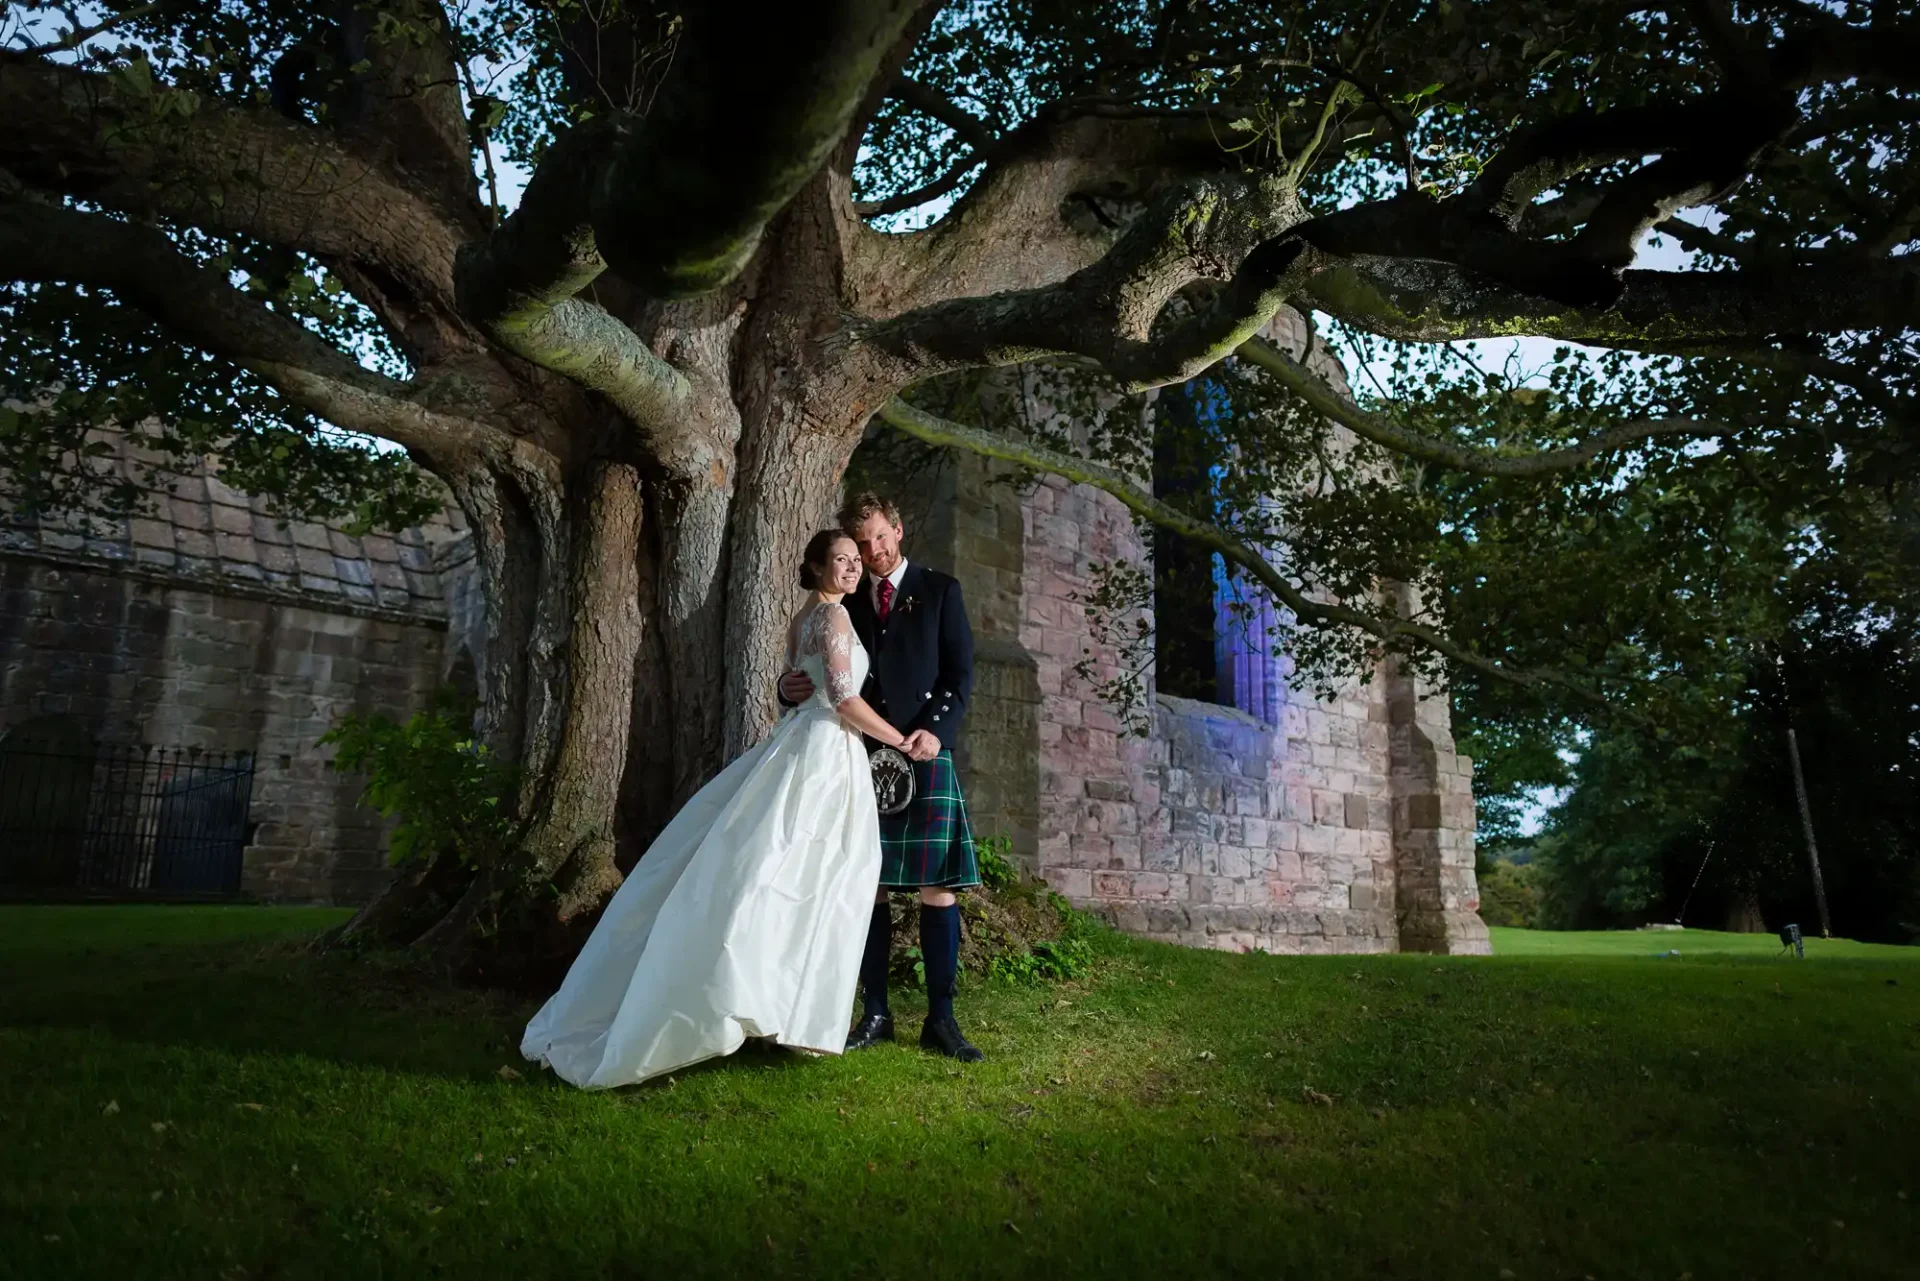 A bride in a white dress and a groom in a kilt posing under a large tree near a stone building with illuminated windows.